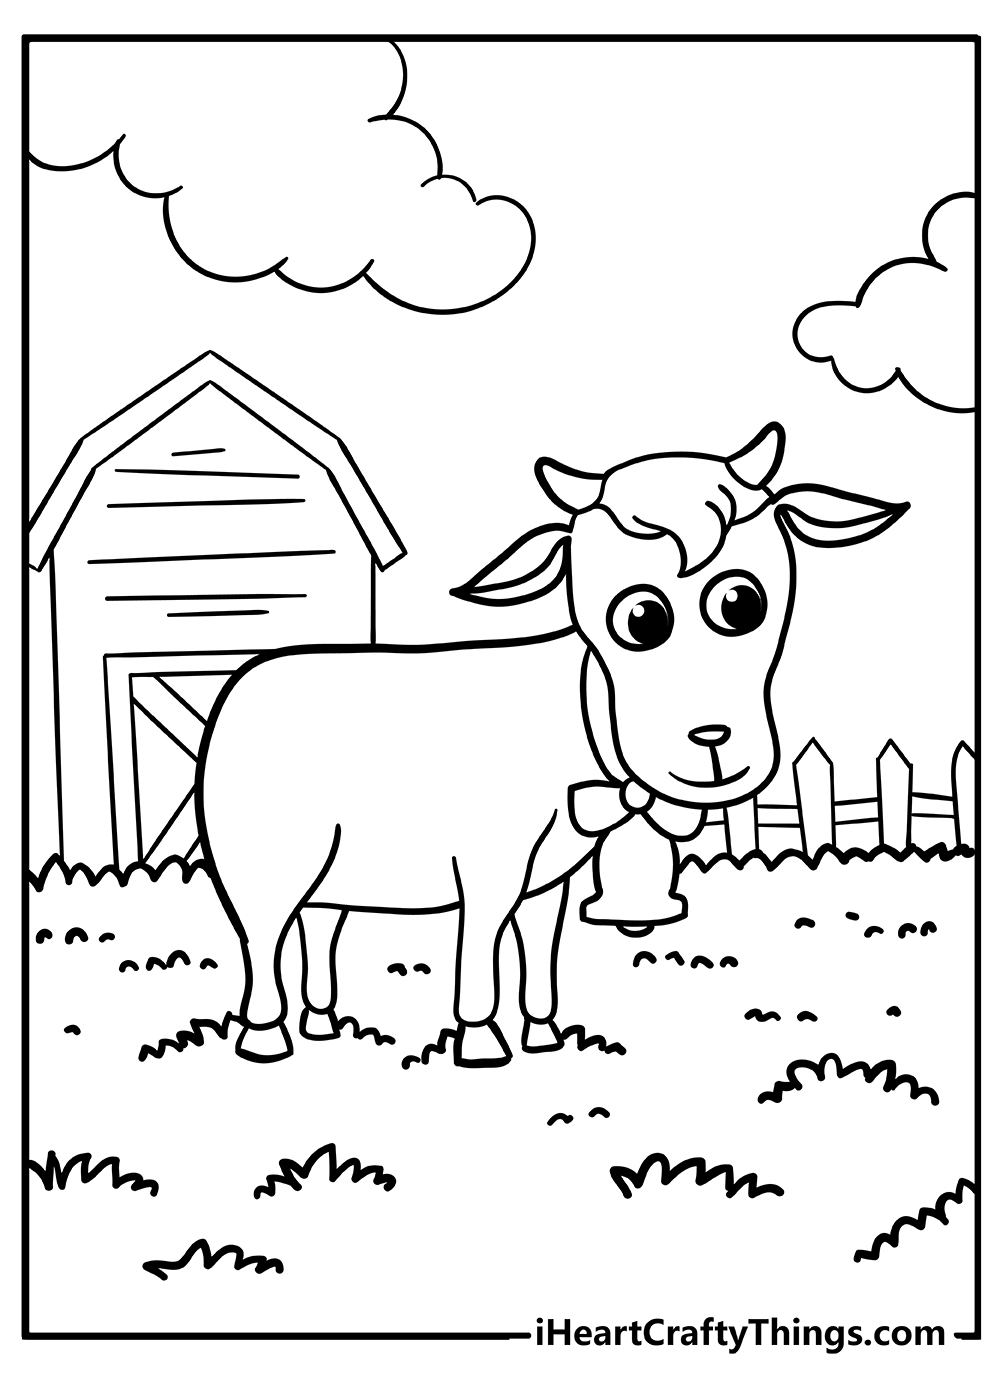 Printable Farm Animal Coloring Pages Updated 21